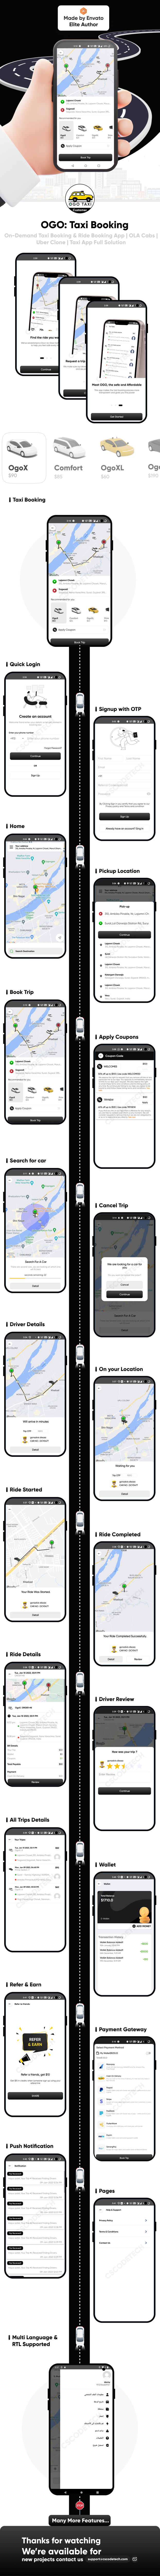 OGO : On-Demand Taxi Booking & Ride Booking App | OLA Cabs | Uber Clone | Taxi App Full Solution - 7